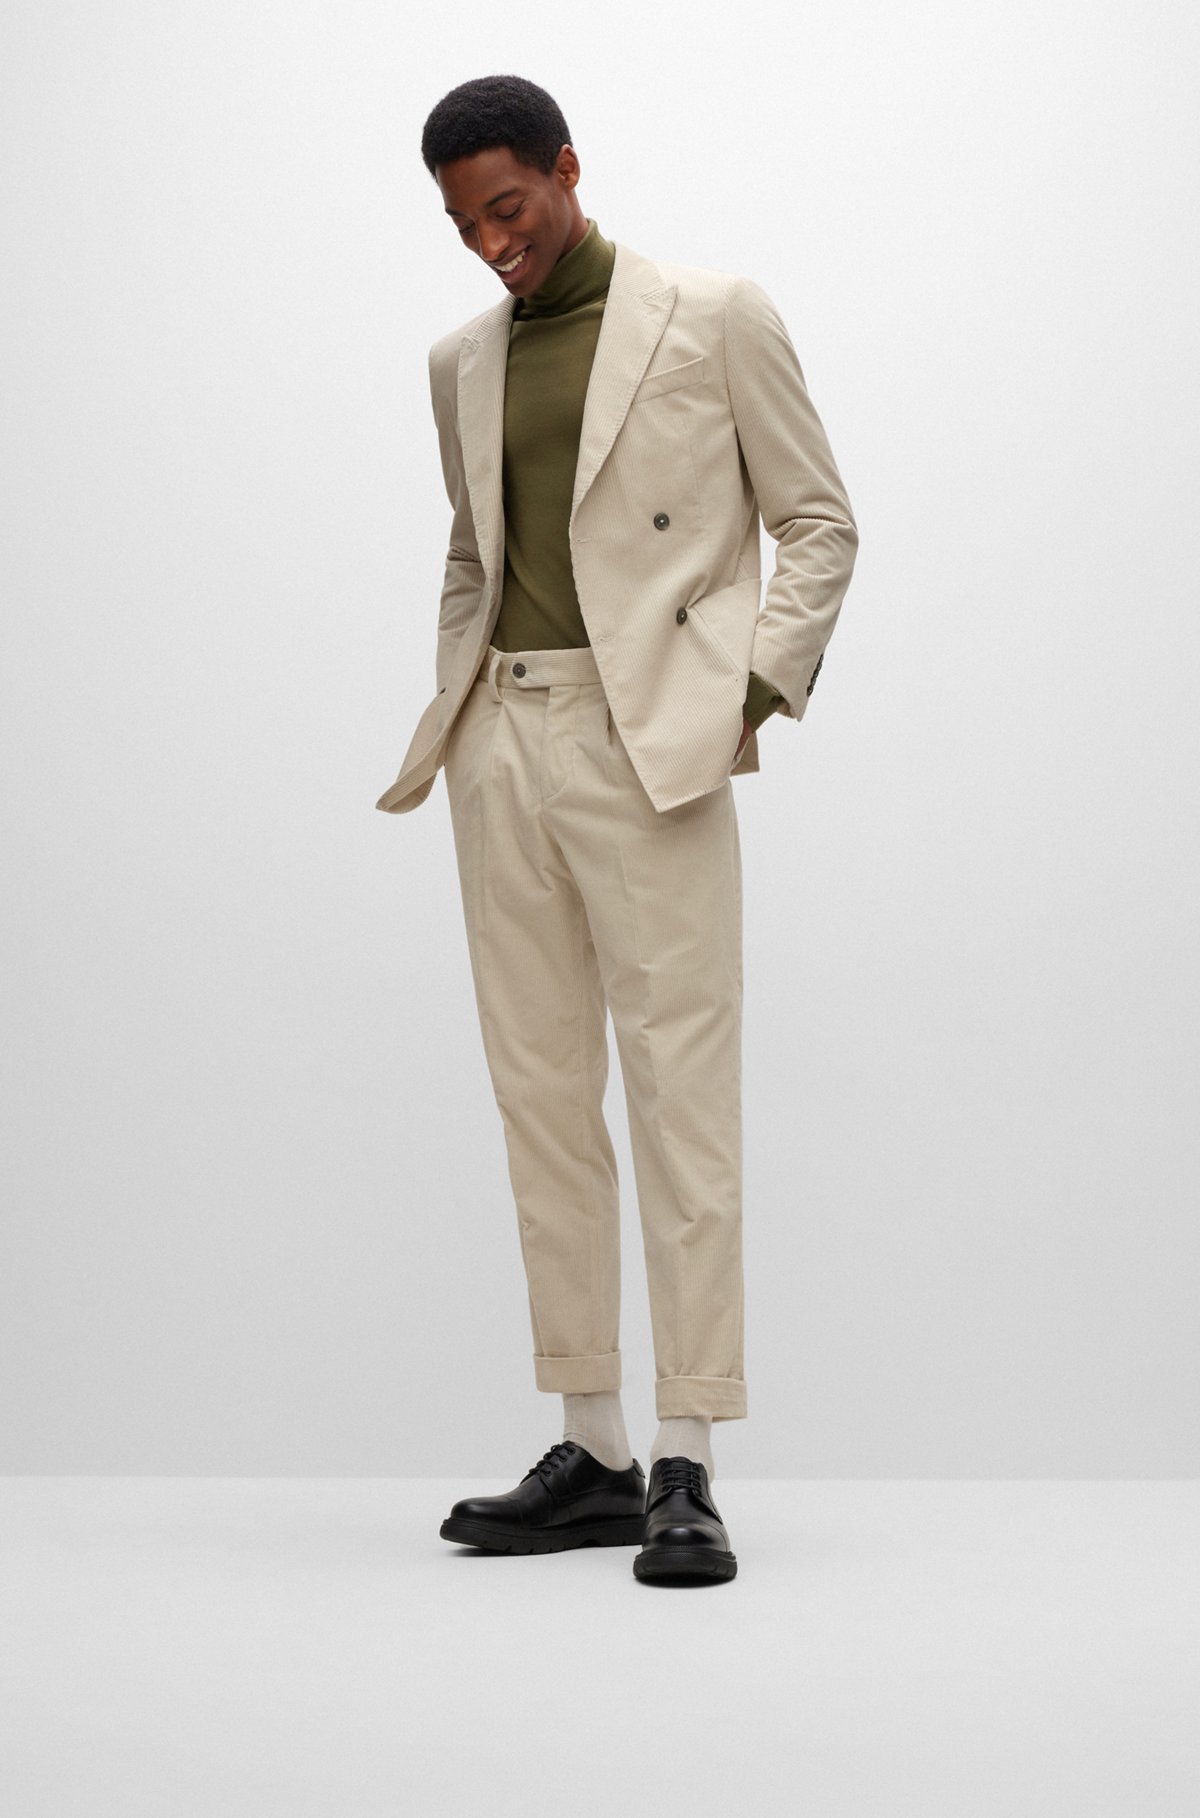 Double-breasted slim-fit jacket in cotton-cashmere corduroy, White